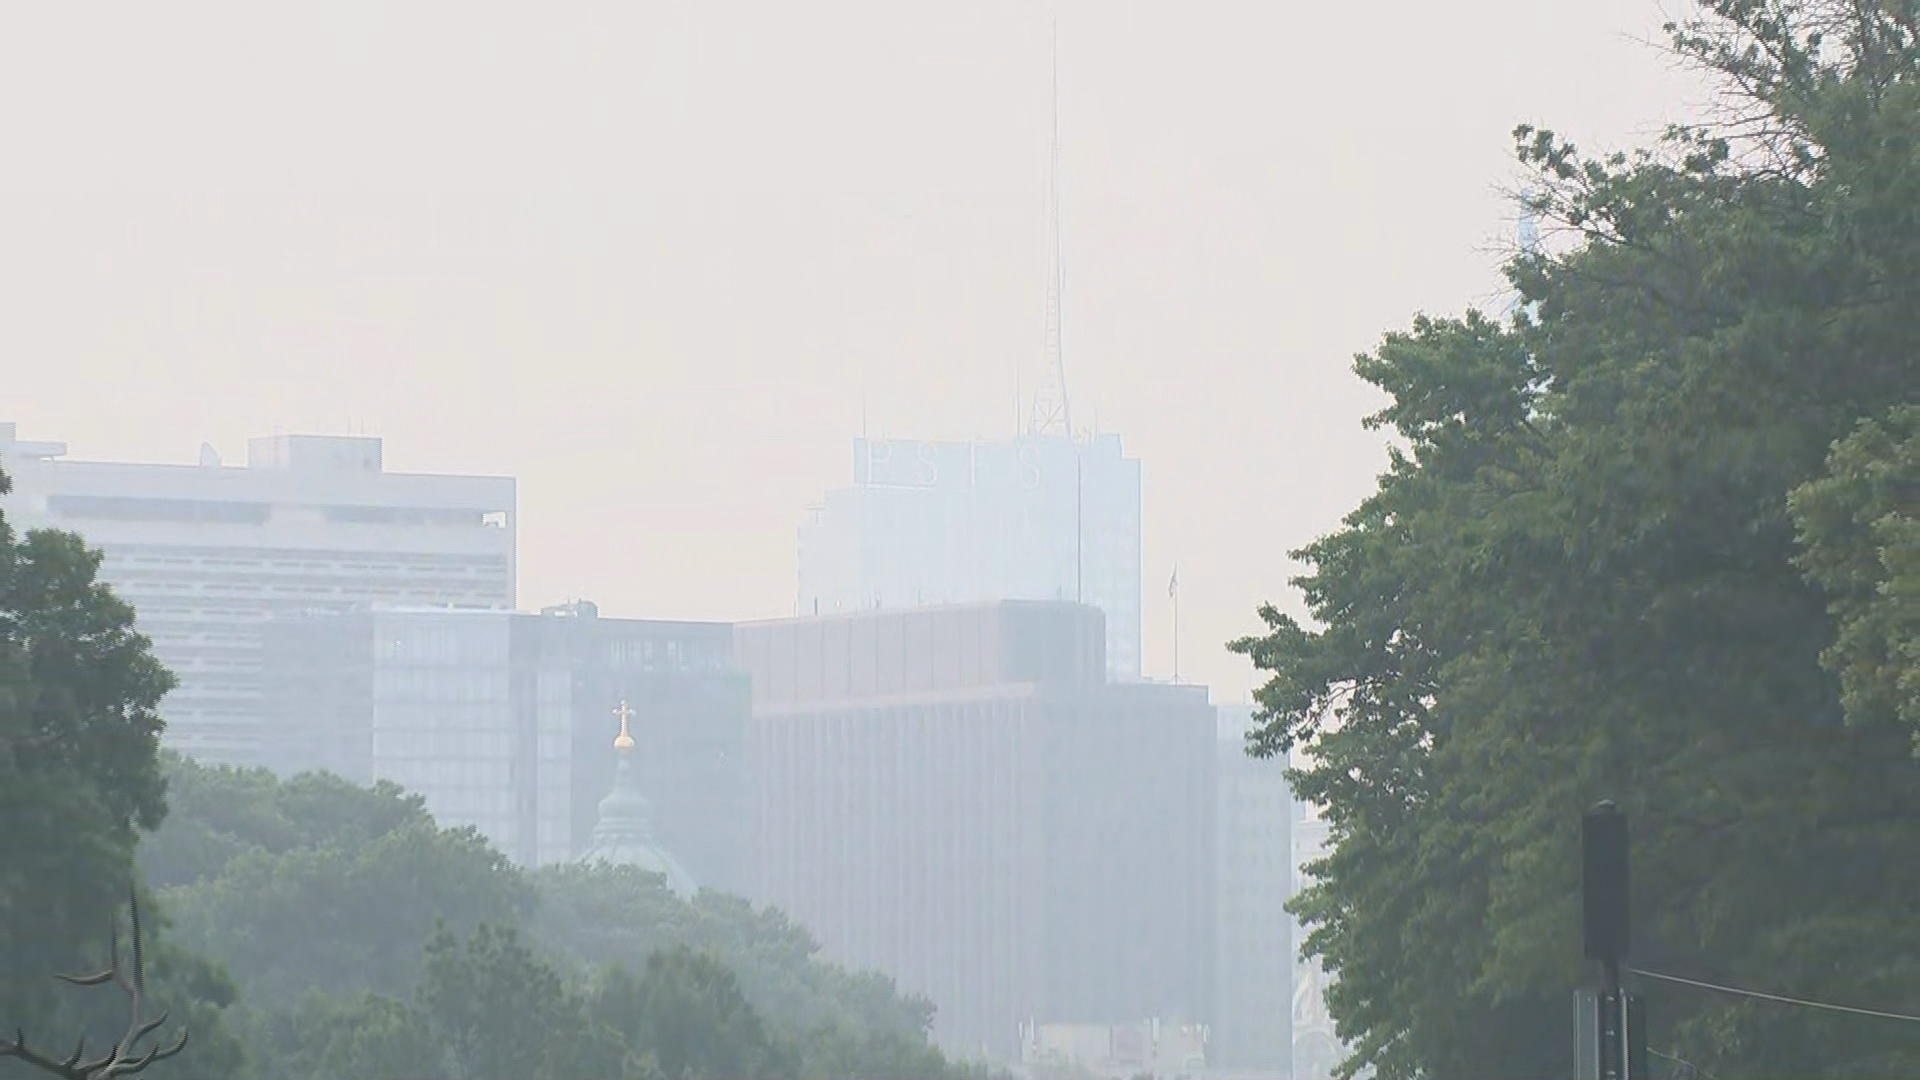 Canadian wildfire smoke prompts air quality alerts across Philadelphia area. Here are maps of the impact